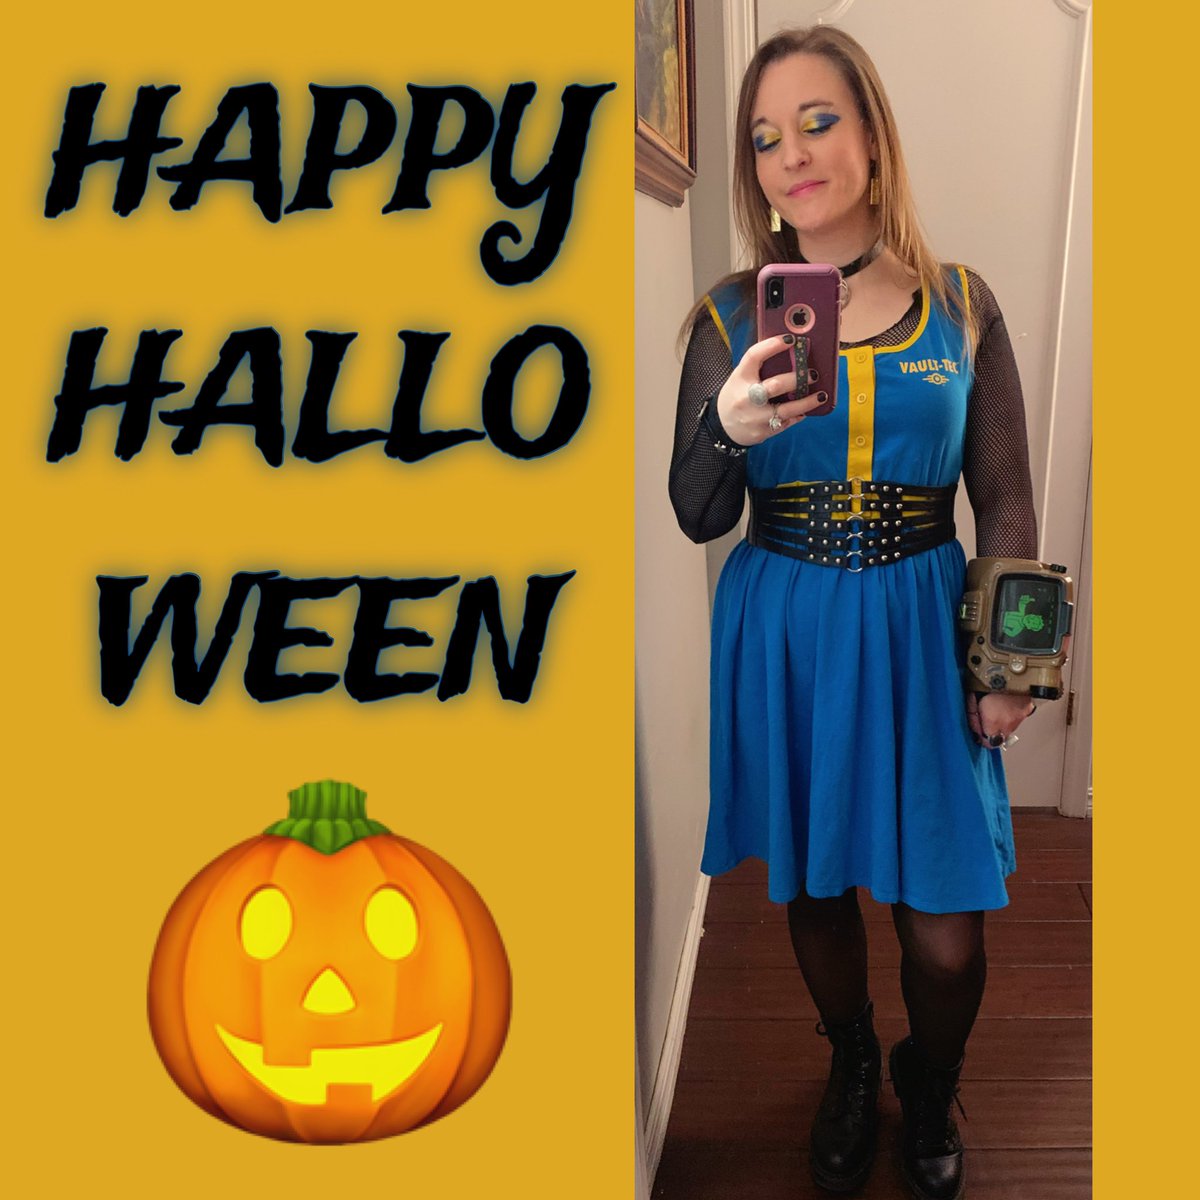 🎃Happy Halloween from Vault 111🎃

#halloween #costume #fallout #vault111 #happyhalloween #halloweencostume #apocalyptic #gamer #videogames #vaultgirl #pipboy #electronicmusic #electronica #synthwave #synthpop #retro #newwave #retrowave #indieelectronic